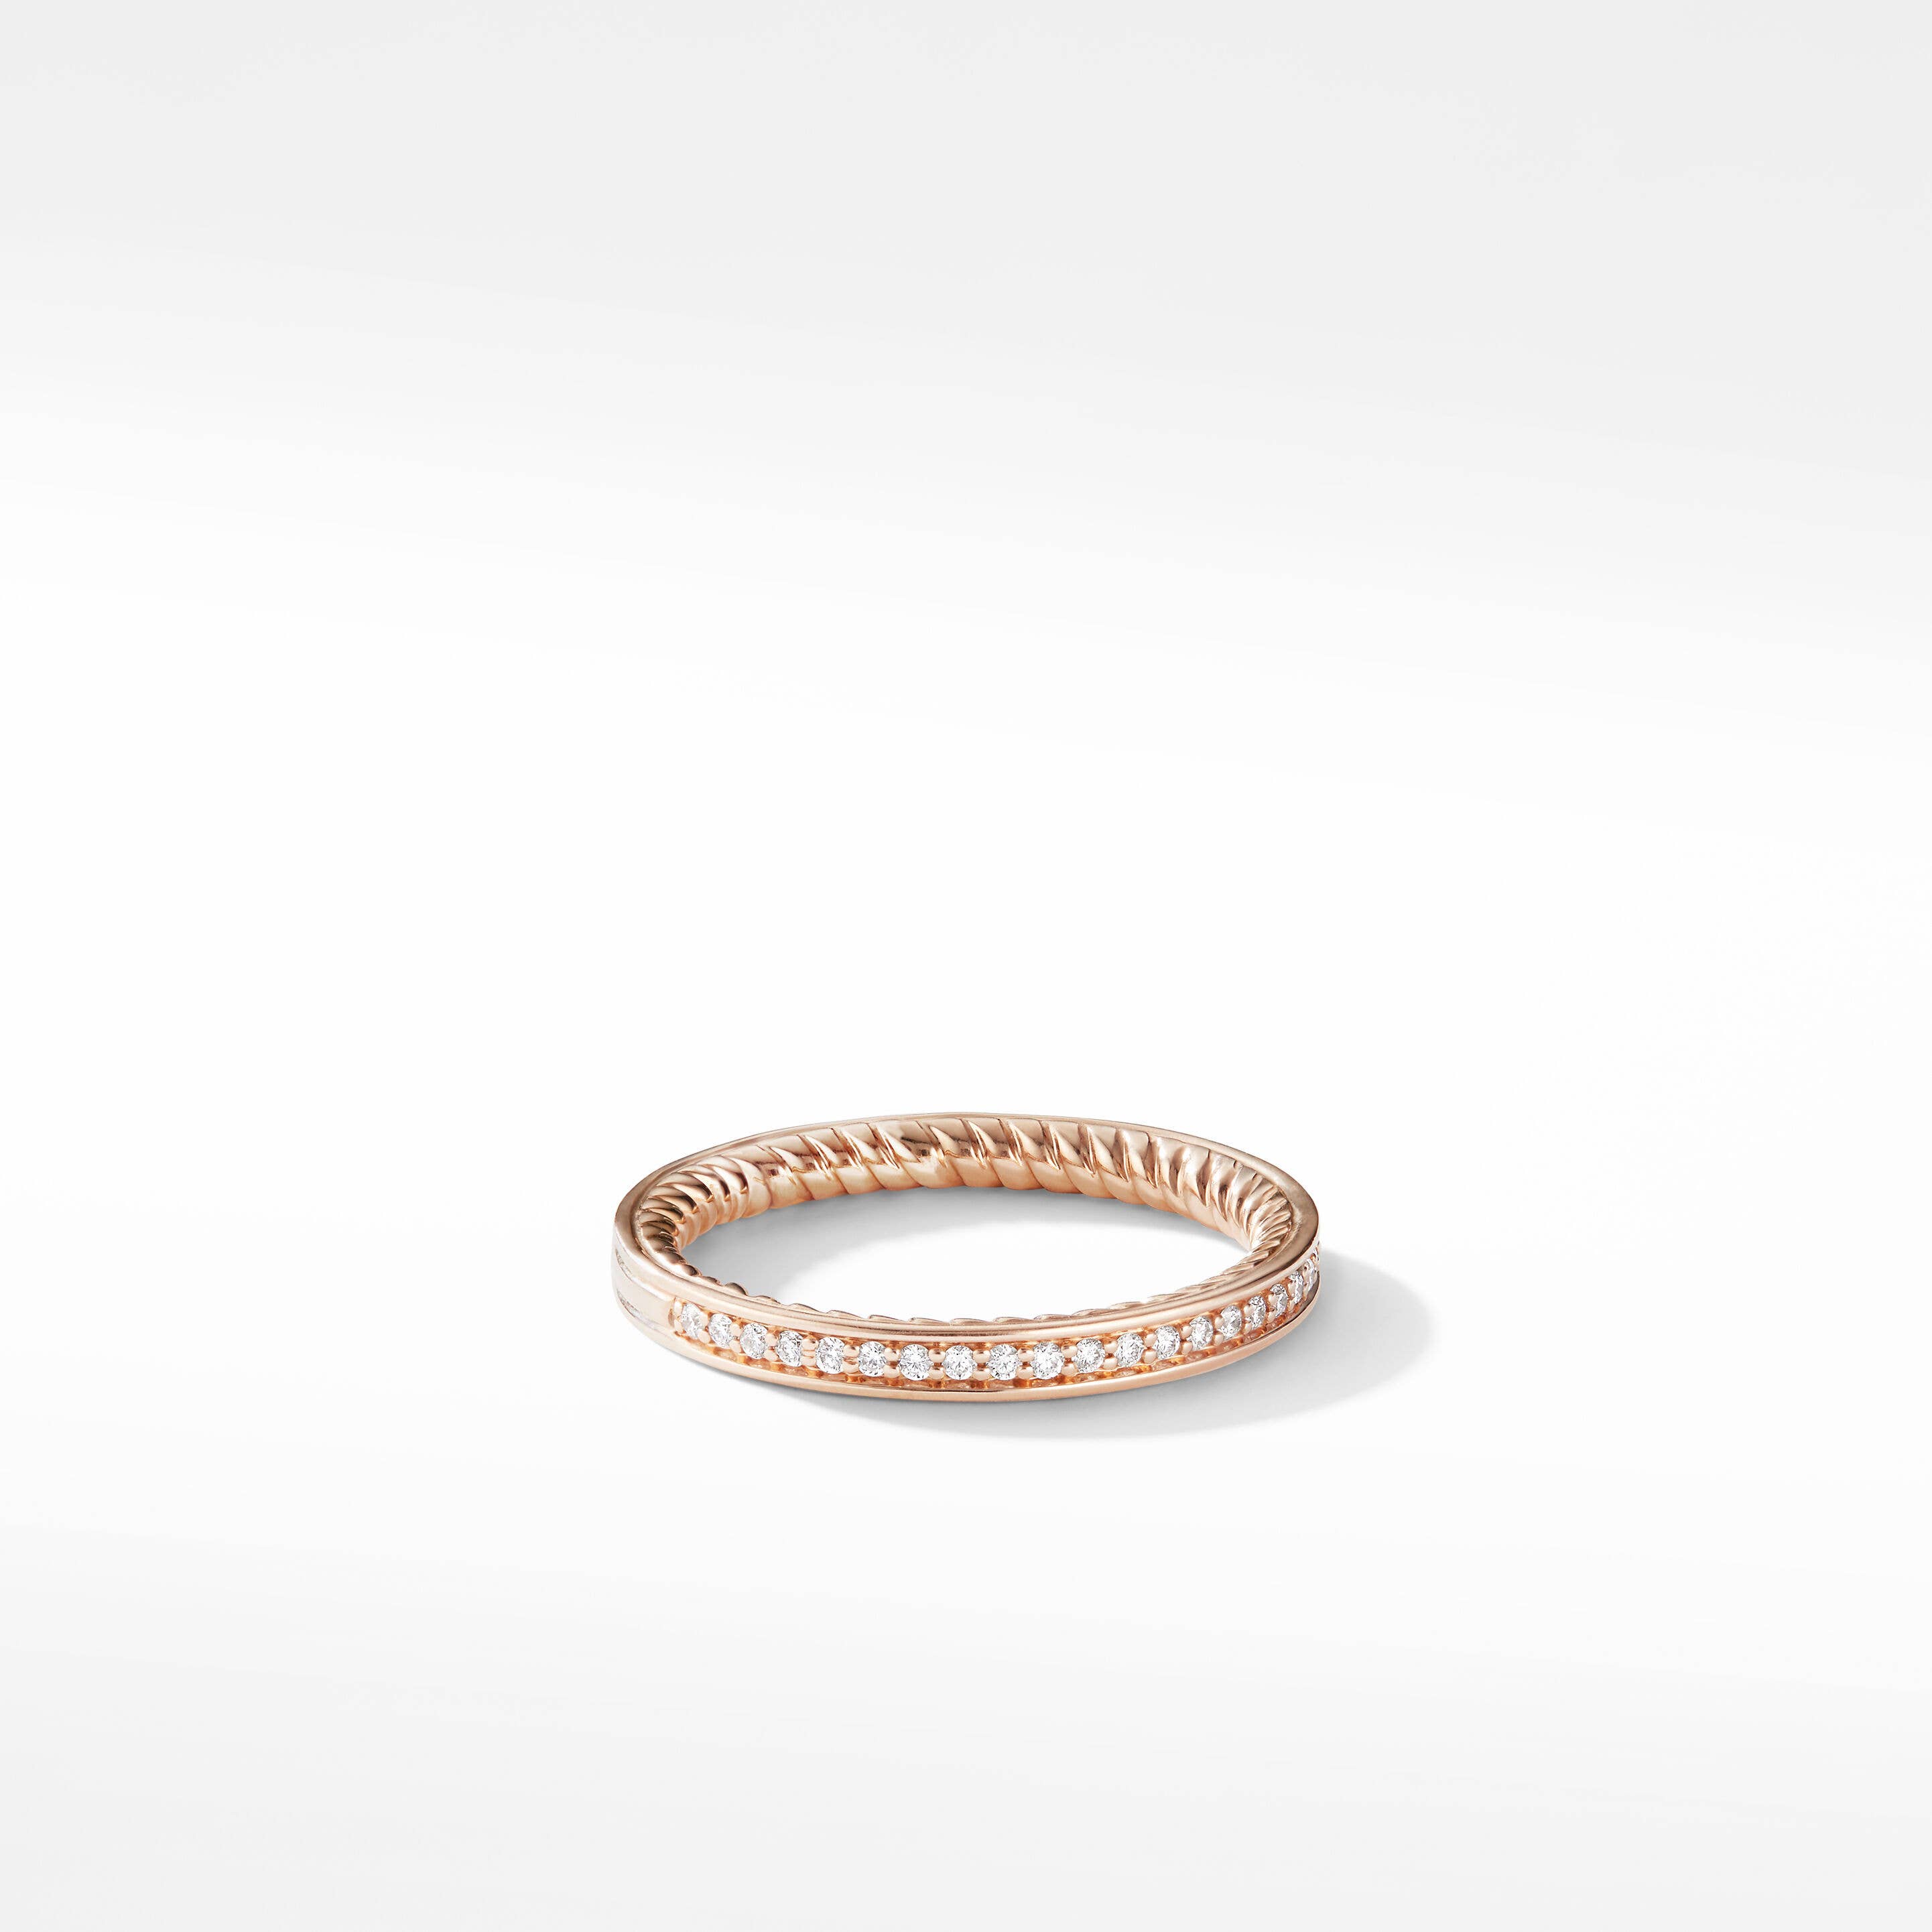 DY Eden Partway Band Ring in 18K Rose Gold with Pavé Diamonds